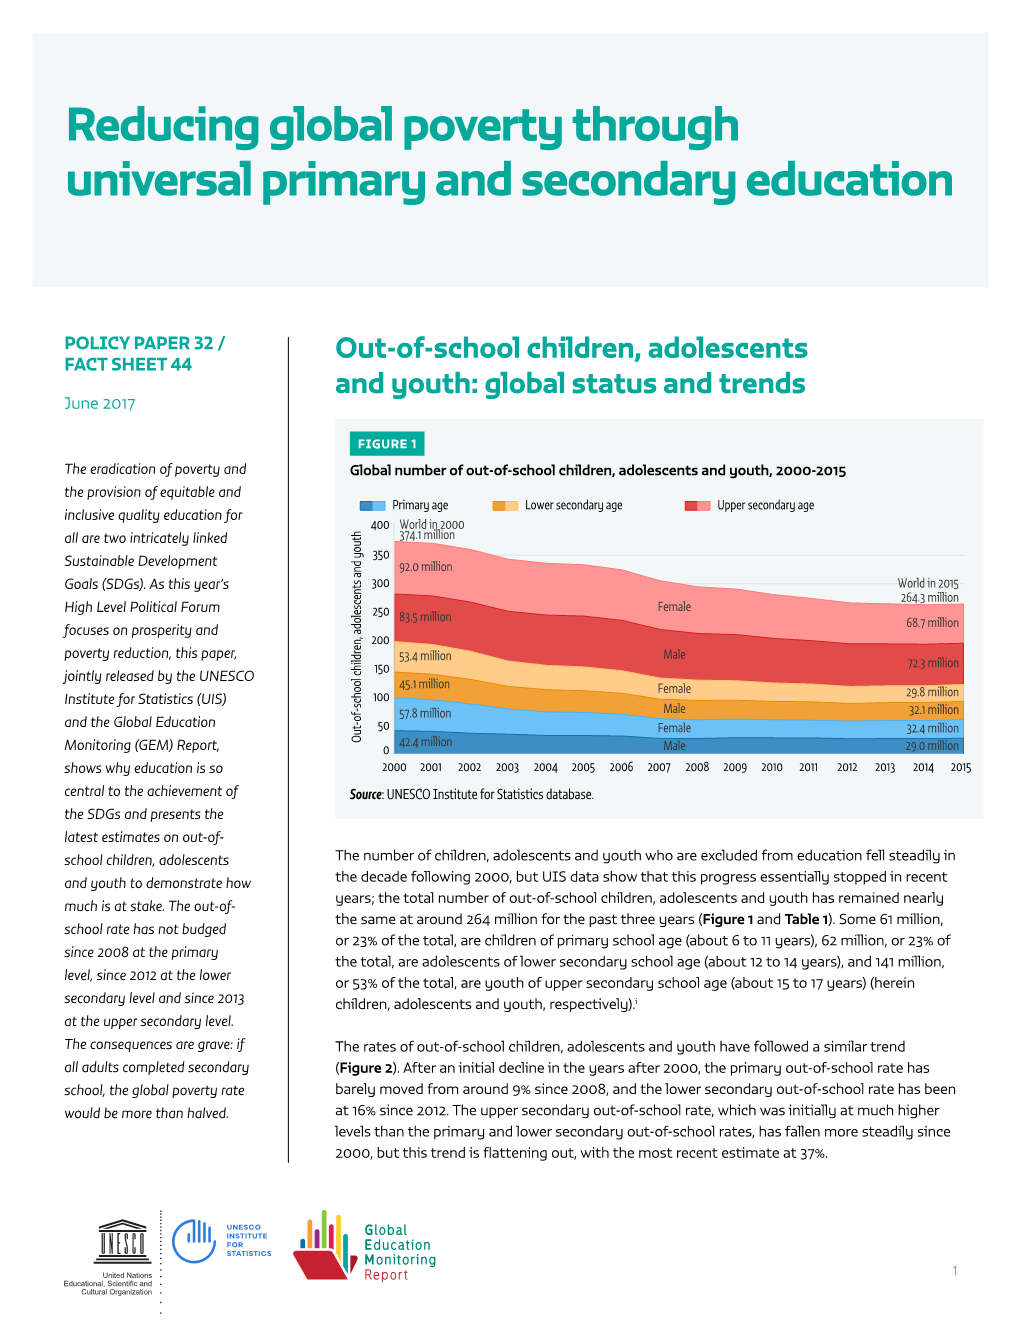 Reducing Global Poverty Through Universal Primary and Secondary Education